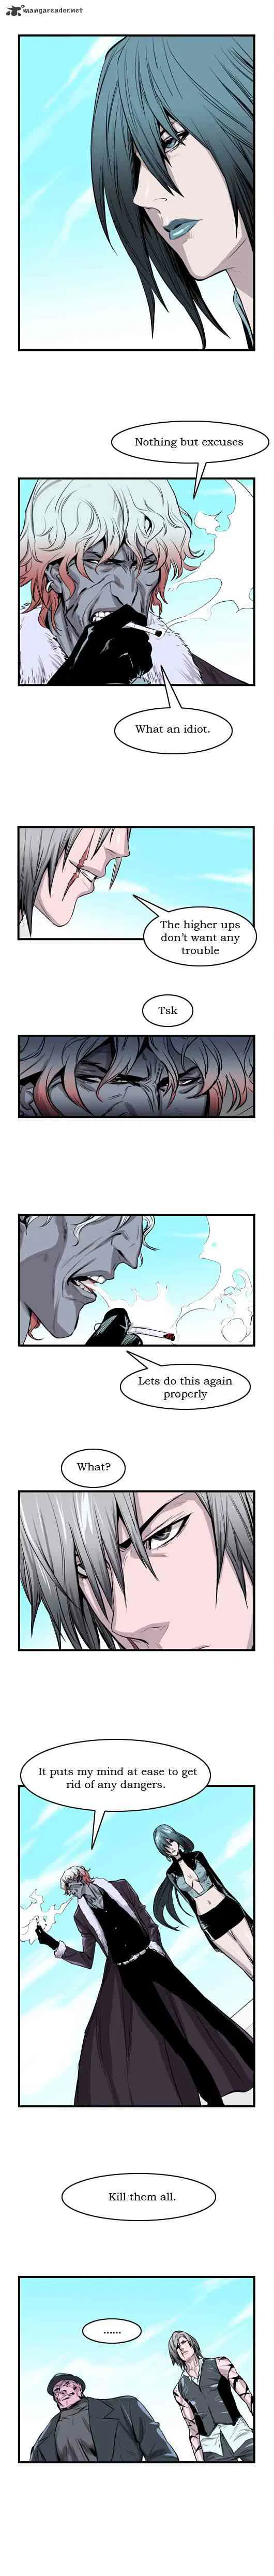 Noblesse Chapter 31 _ Chapters 31-45 page 64